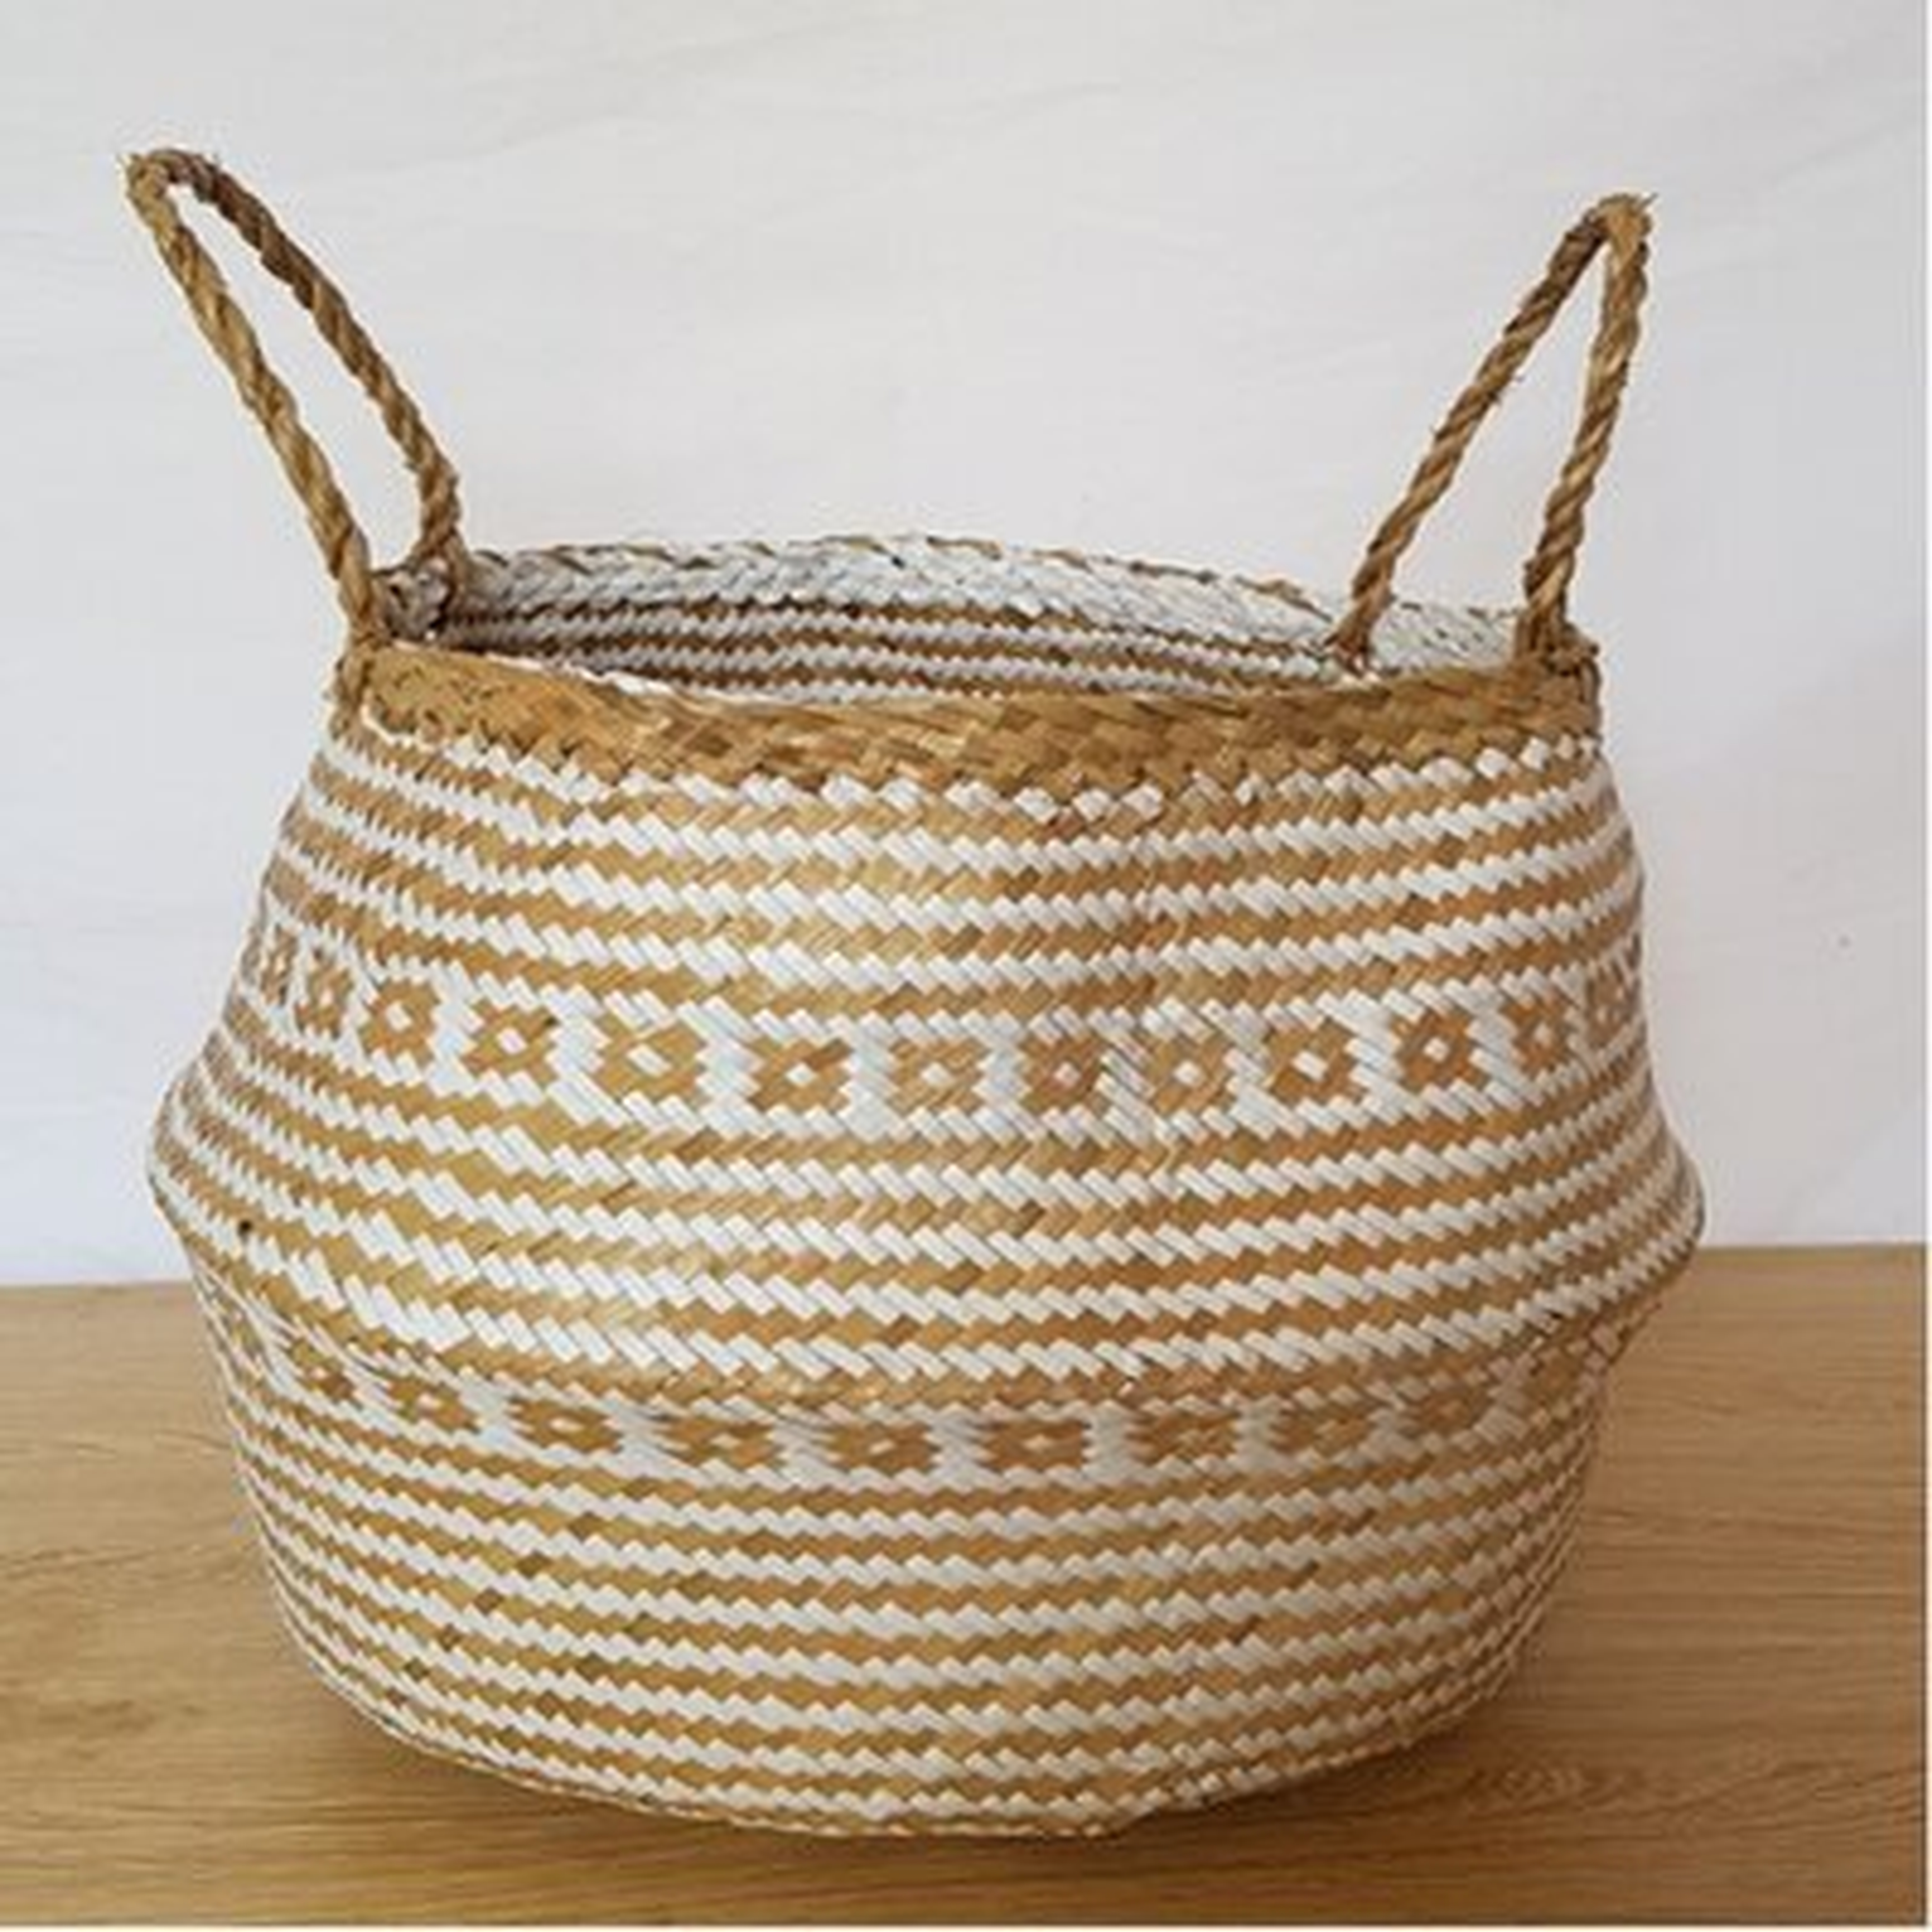 13" Natural and White Seagrass Belly Basket with Handles - Wayfair